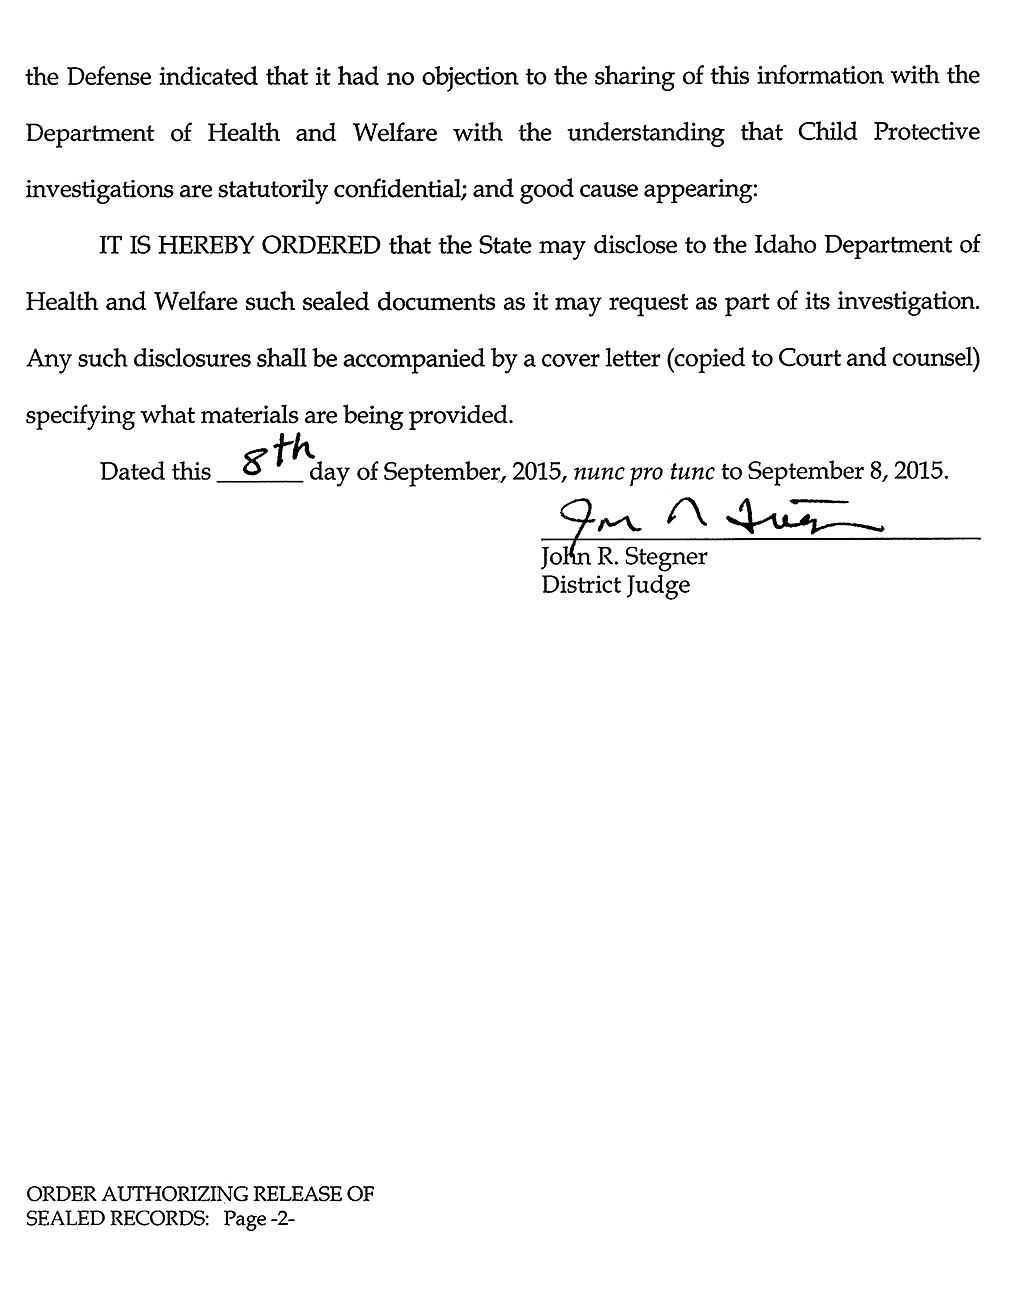 Order Authorizing Release of Sealed Records page 2